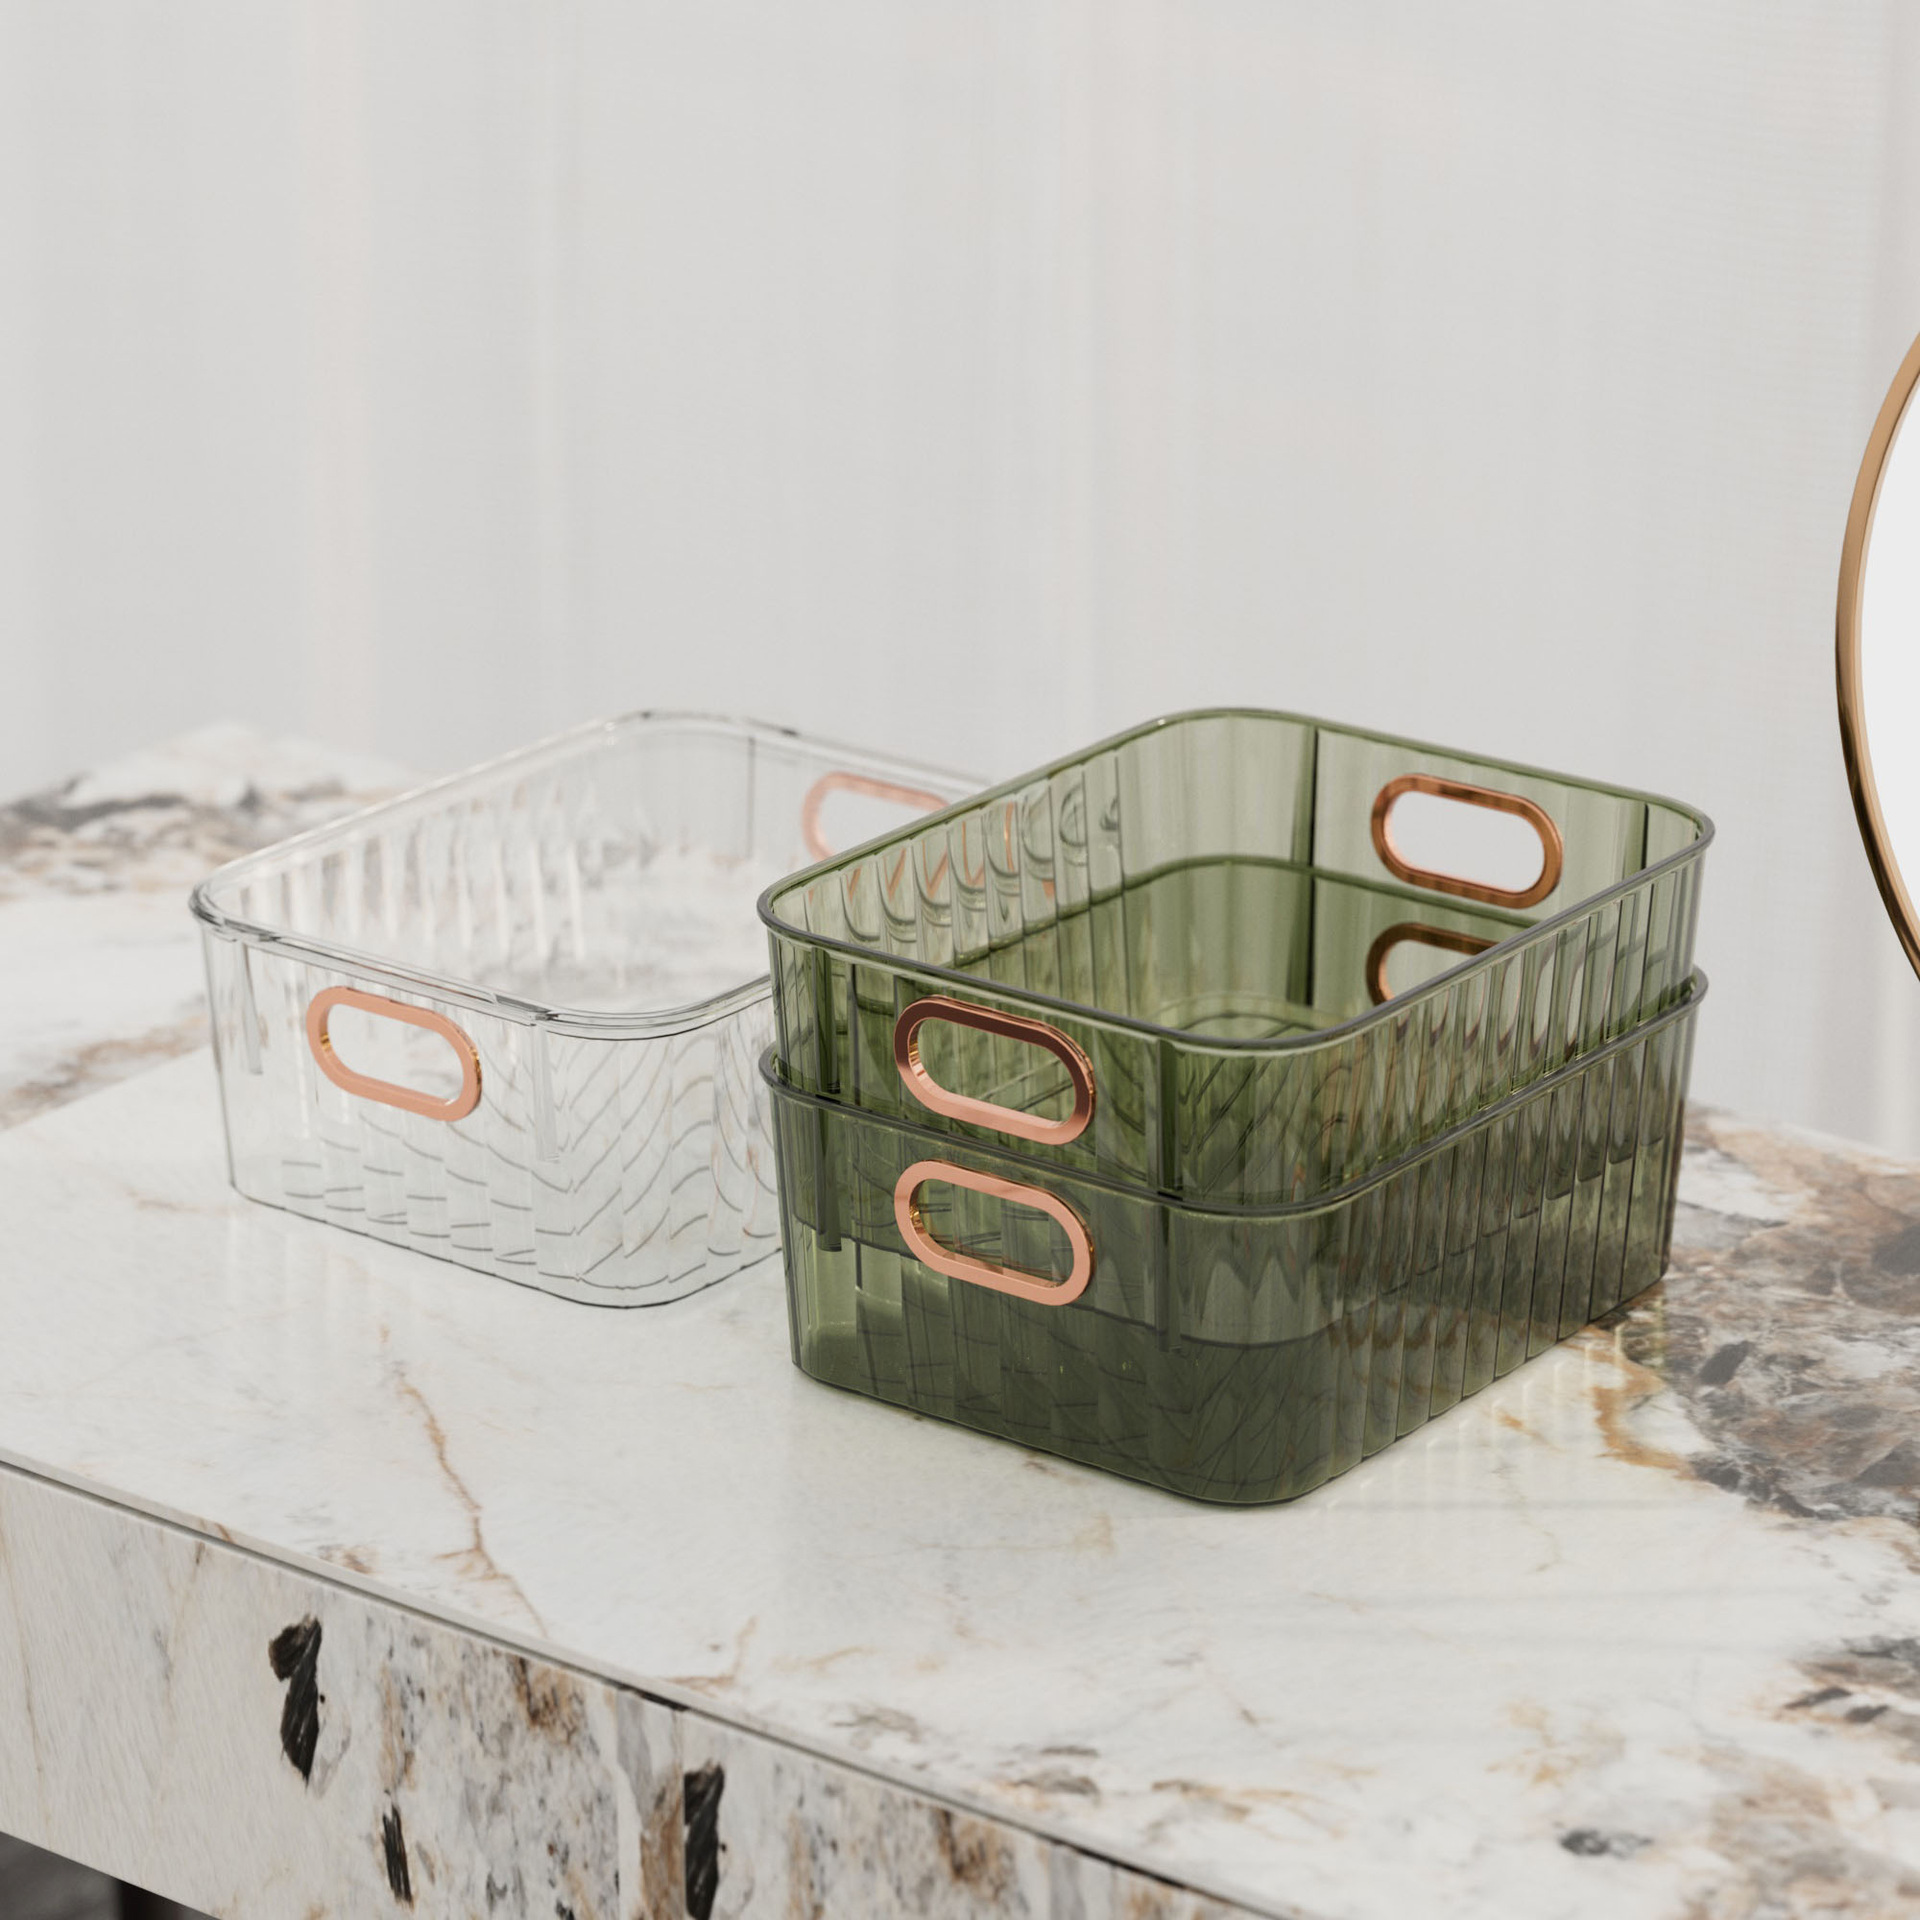 Overflow Purchase Transparent Storage Box Large Capacity Desktop Cosmetics Storage Box Clear with Cover Dustproof Sundries Container